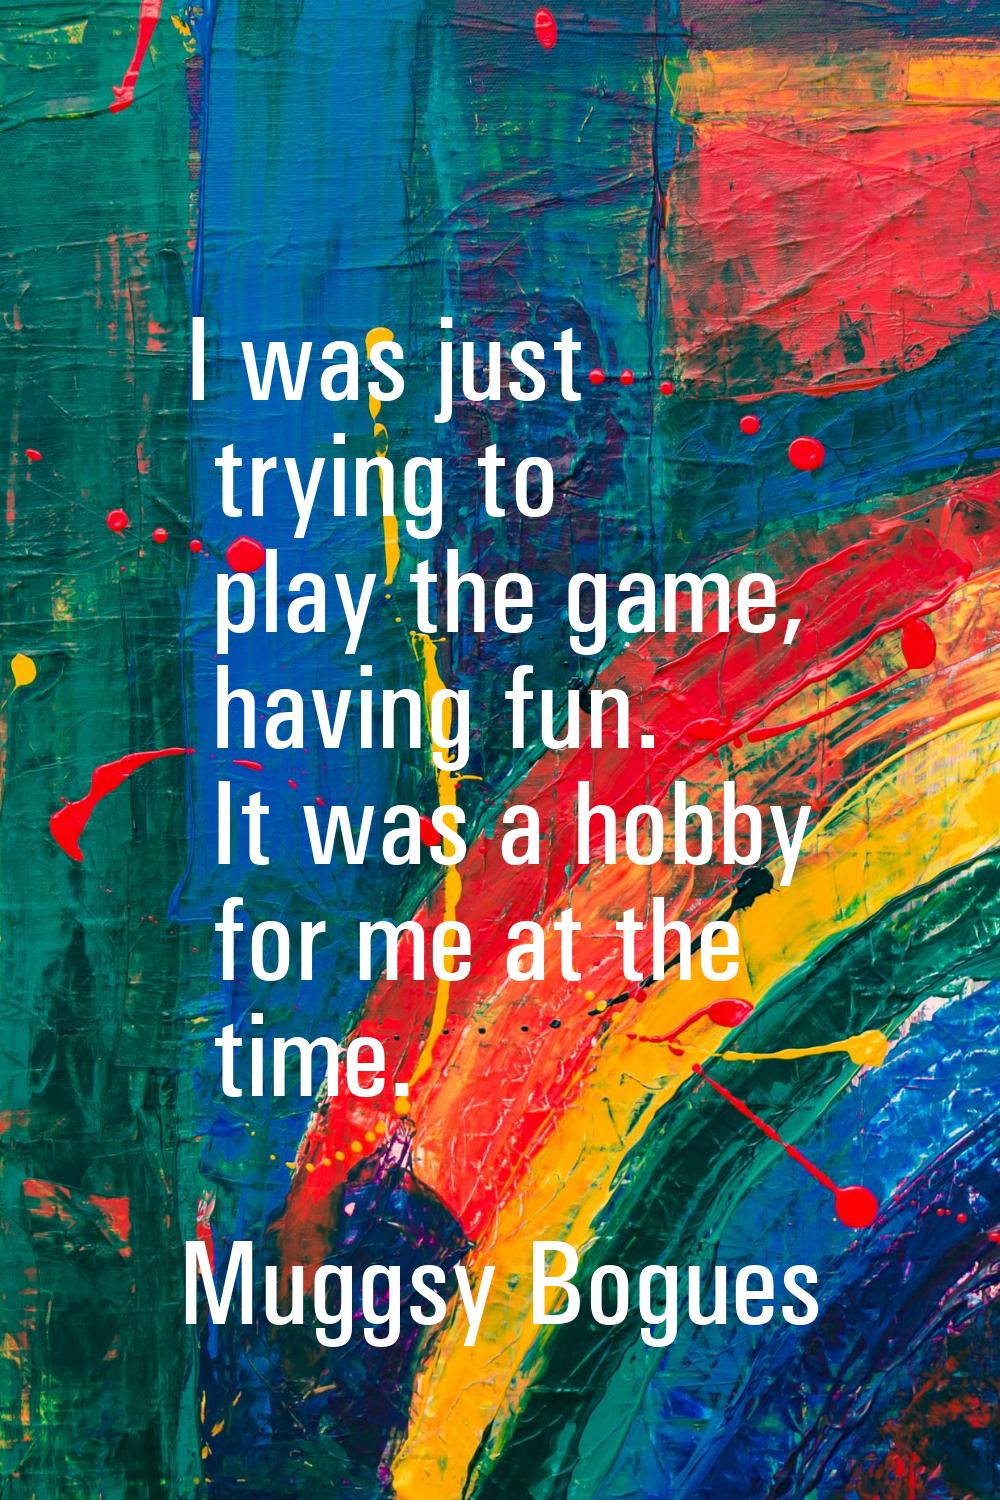 I was just trying to play the game, having fun. It was a hobby for me at the time.